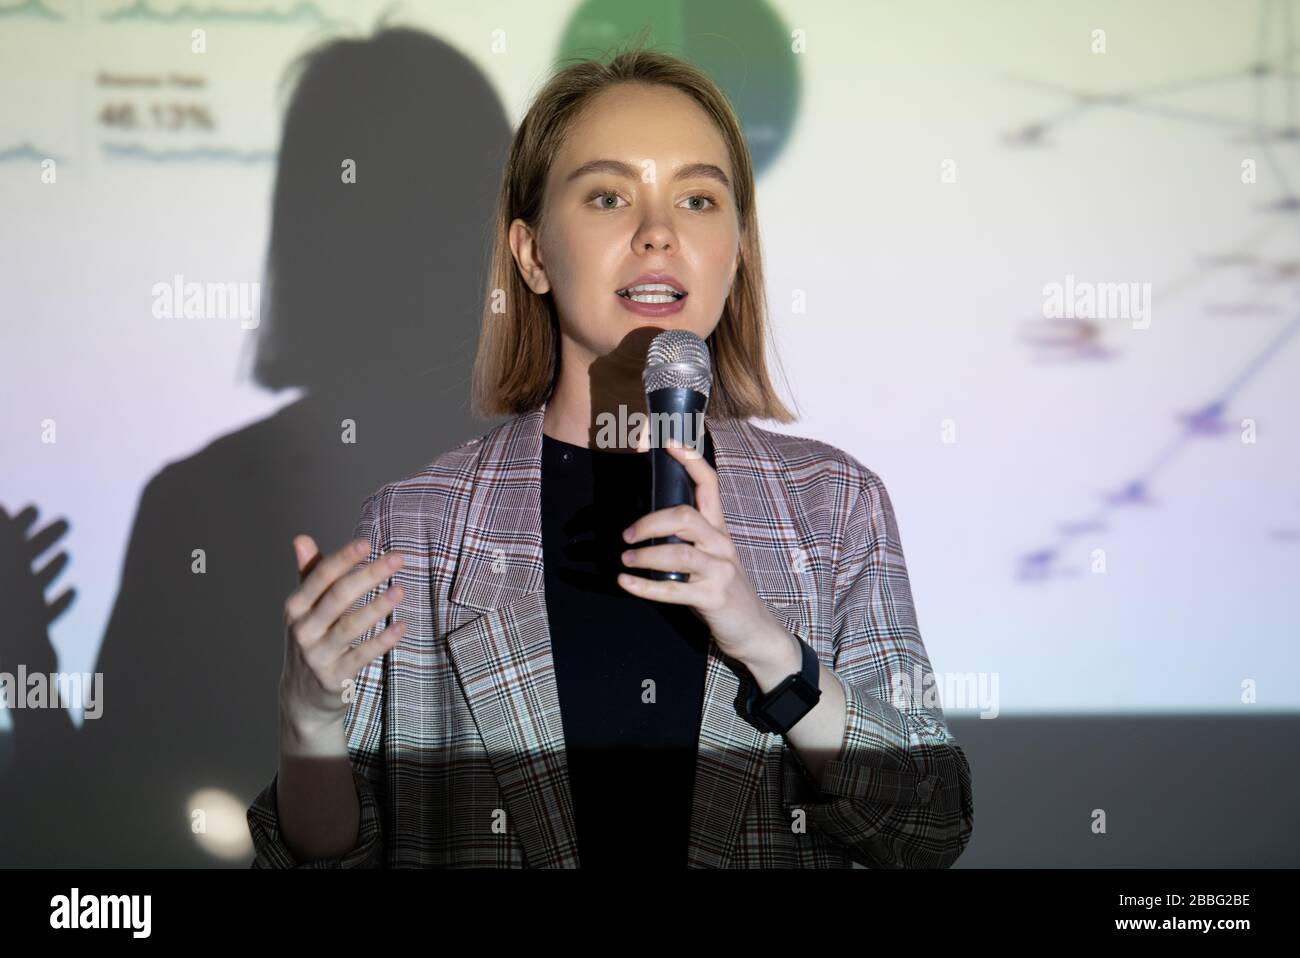 Confident young businesswoman speaking about her success into microphone at entrepreneurship conference Stock Photo